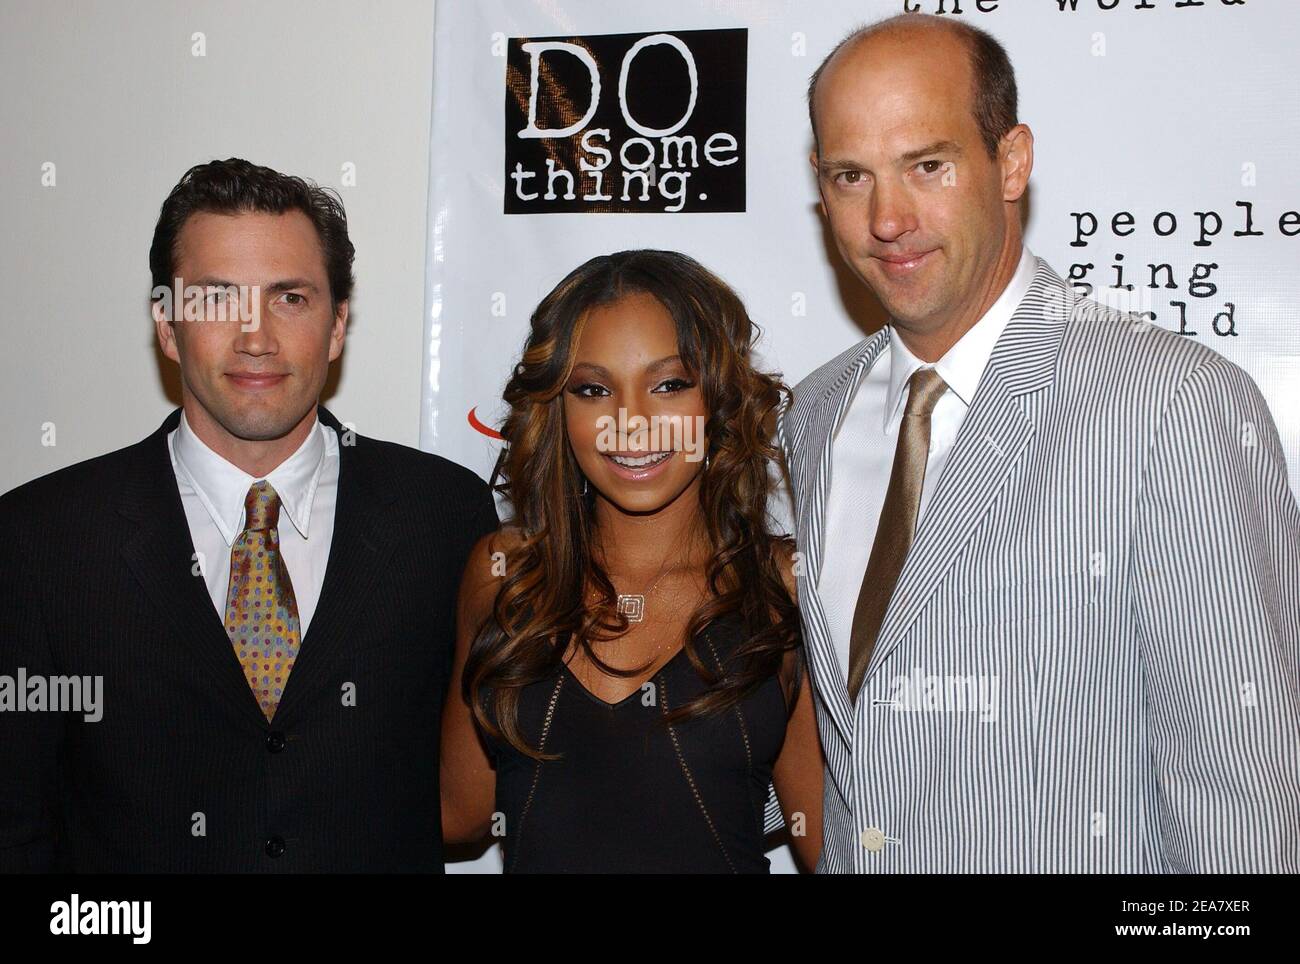 Who is Anthony Edwards married to?